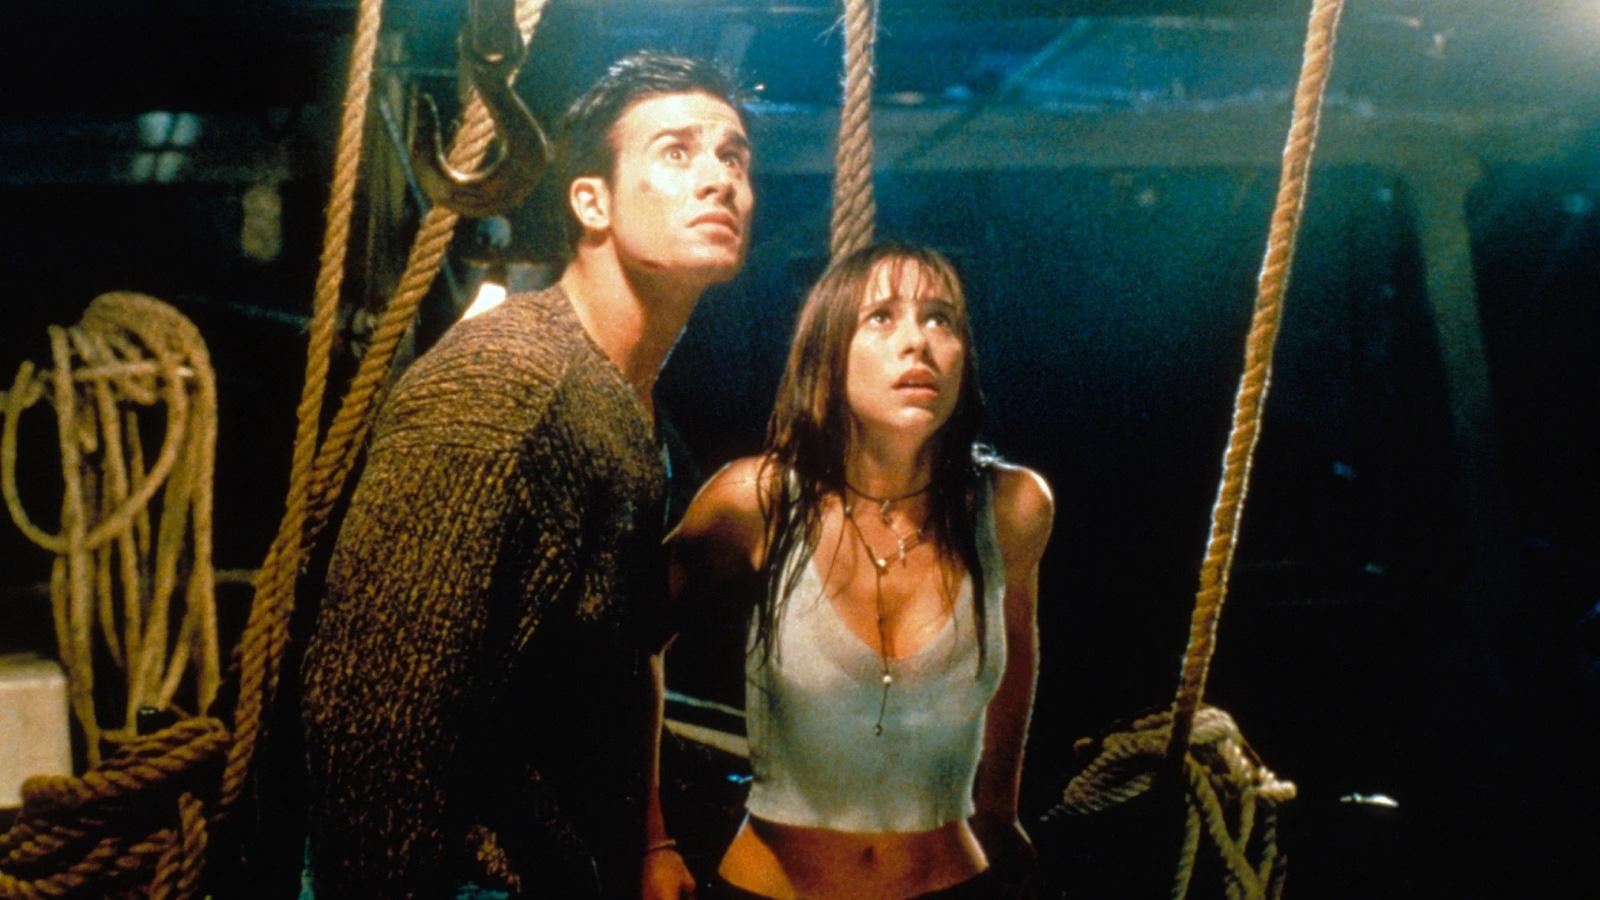 Freddie Prince Jr. and Jennifer Love Hewitt in I Know What You Did Last Summer as Julie and Ray.